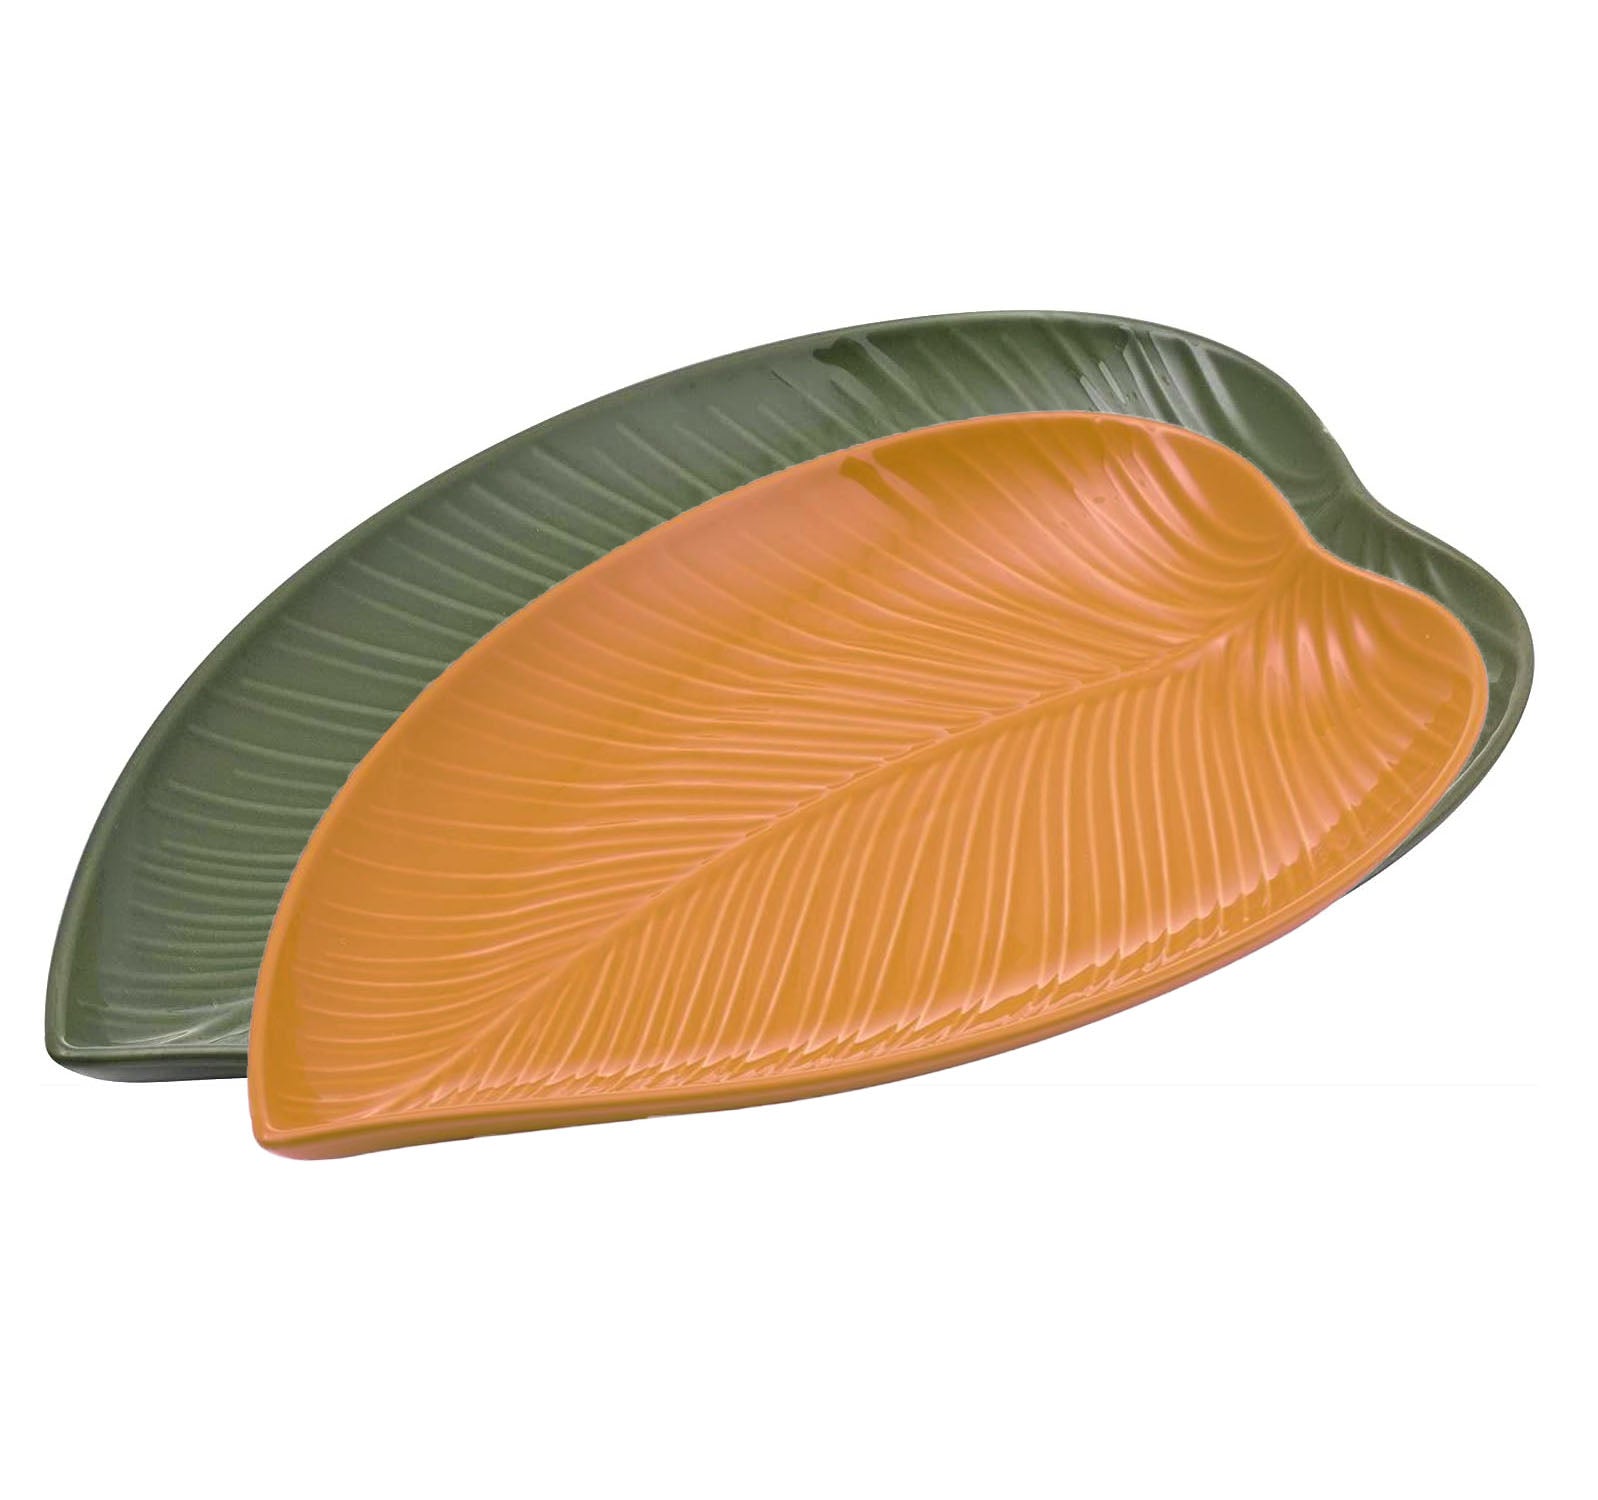 2Pcs In The Forest Leaf Shaped Large & Medium Platters